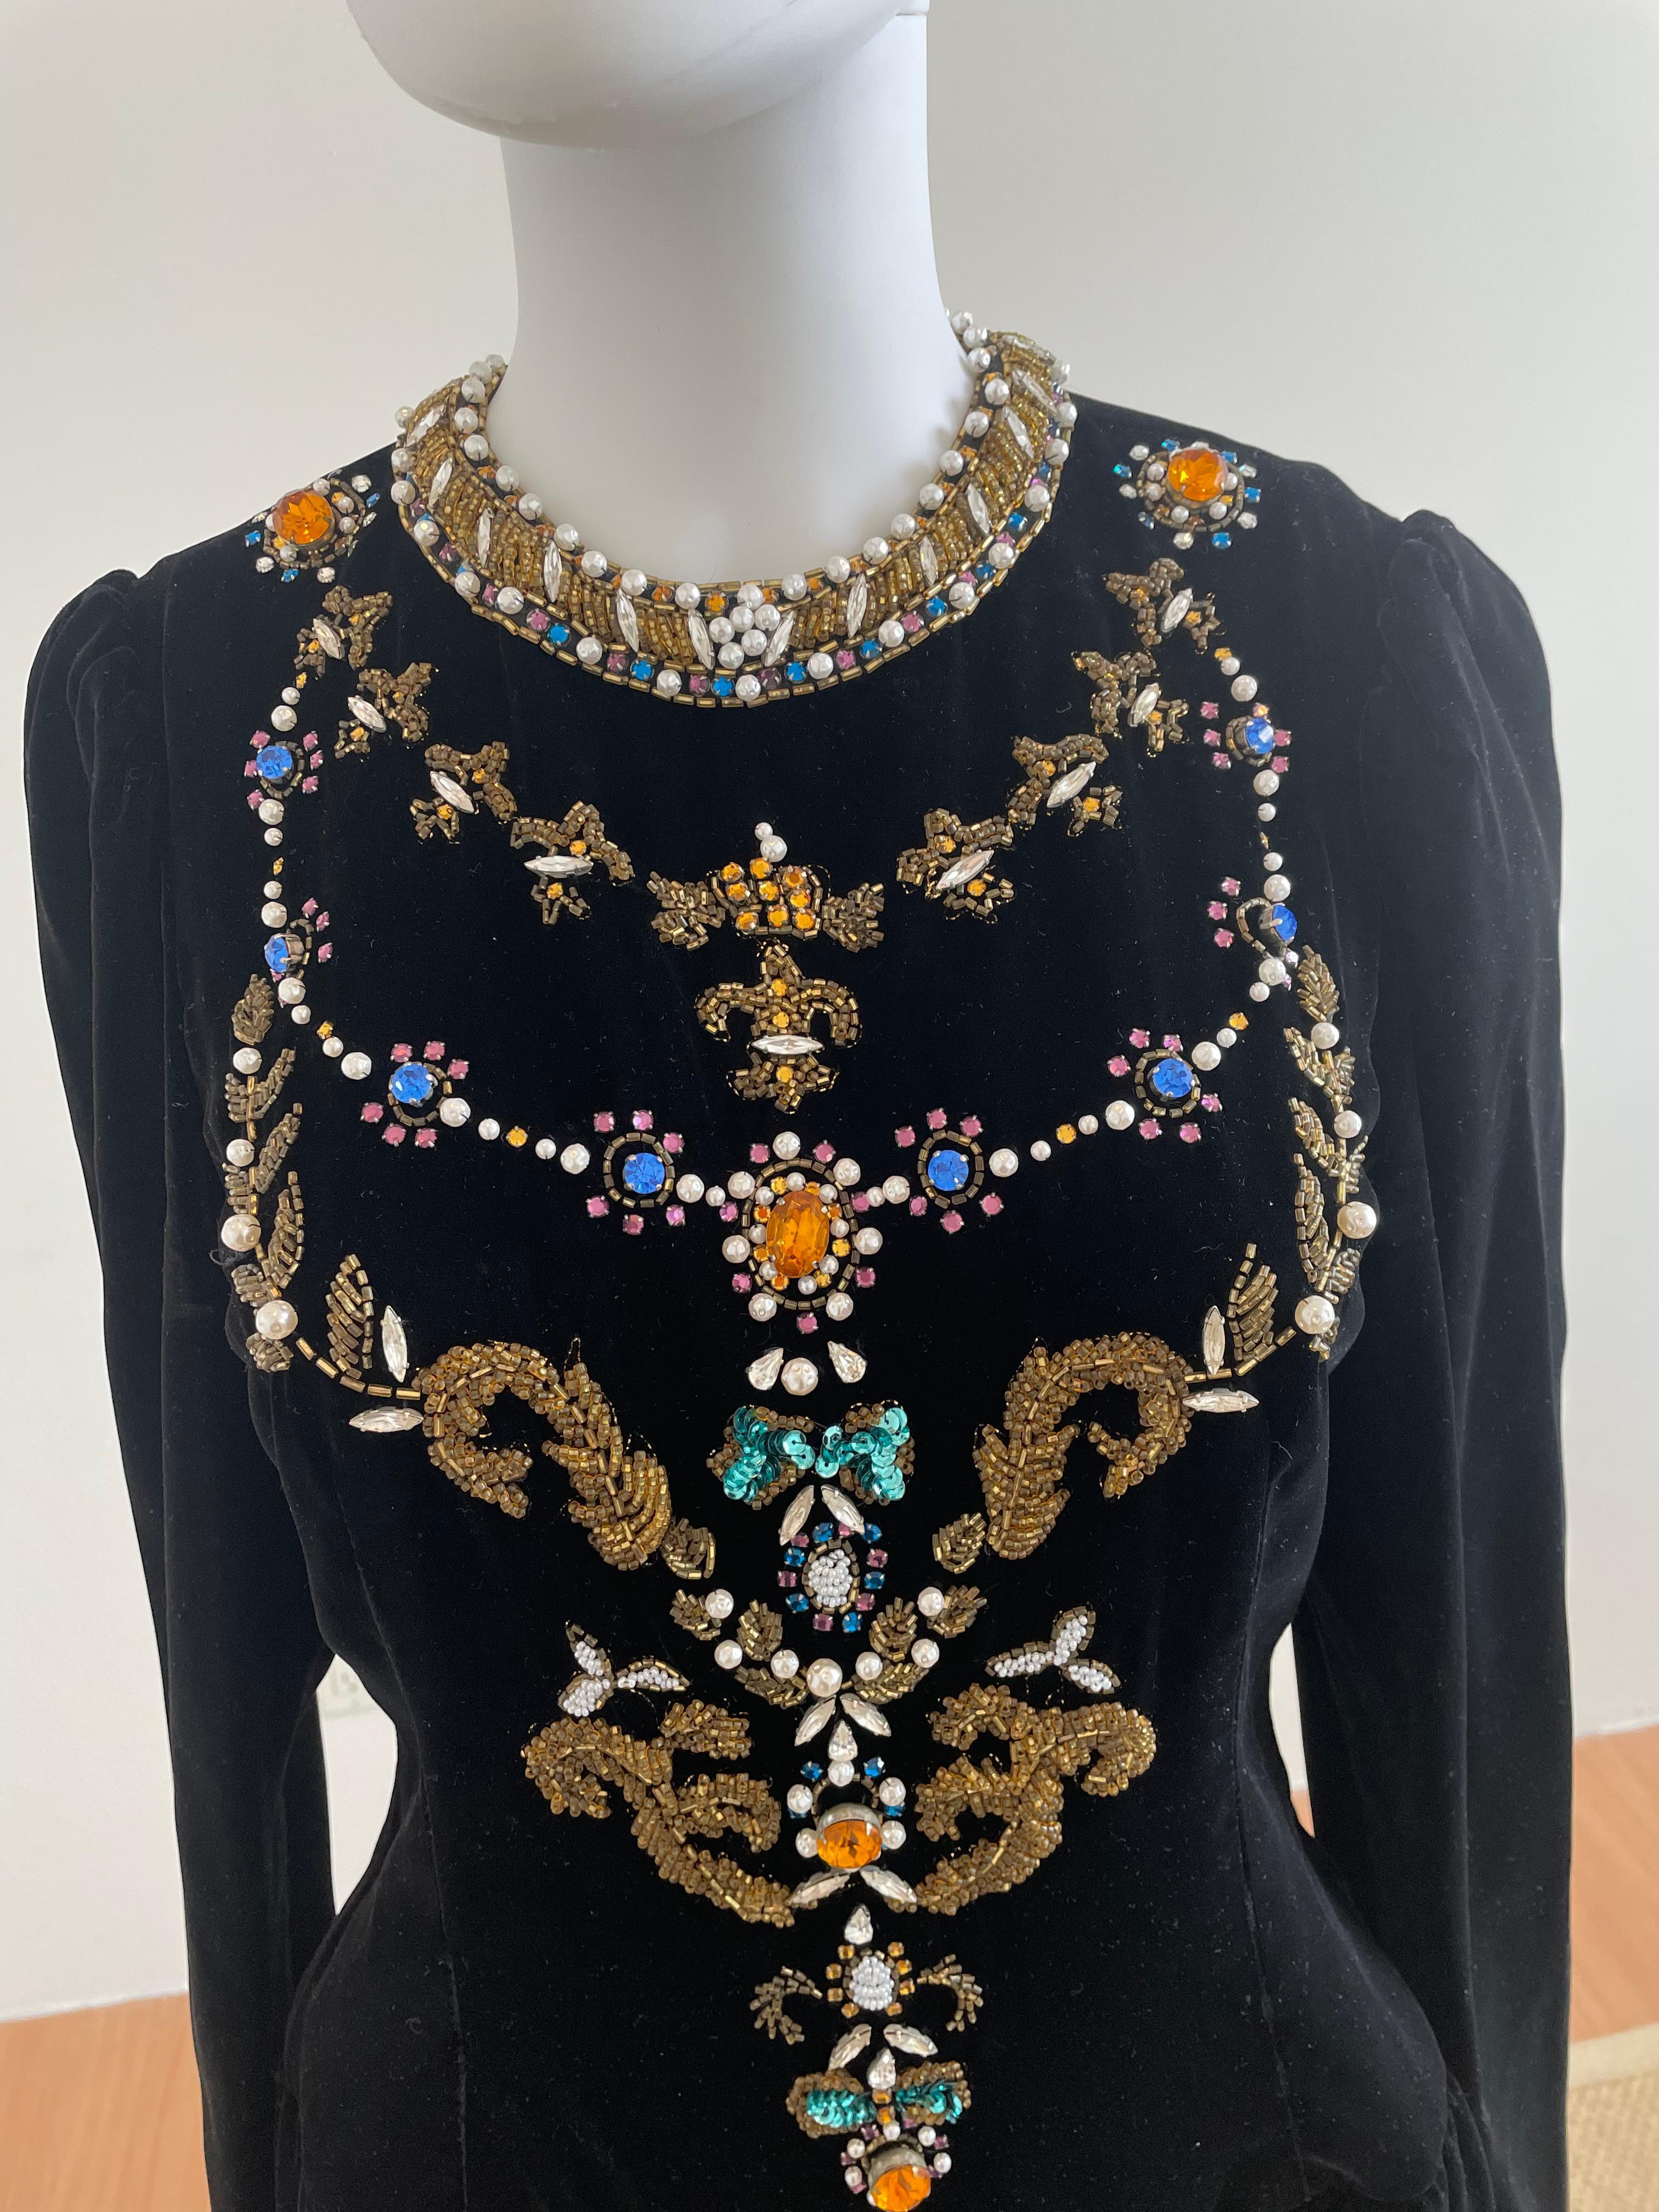 Vintage and Rare Oscar de la Renta Gown with Jeweled Neckline featuring crystals and pearls. This romantic velvet gown has gold embroidered along the neckline that will make you feel regal. Size US 10.